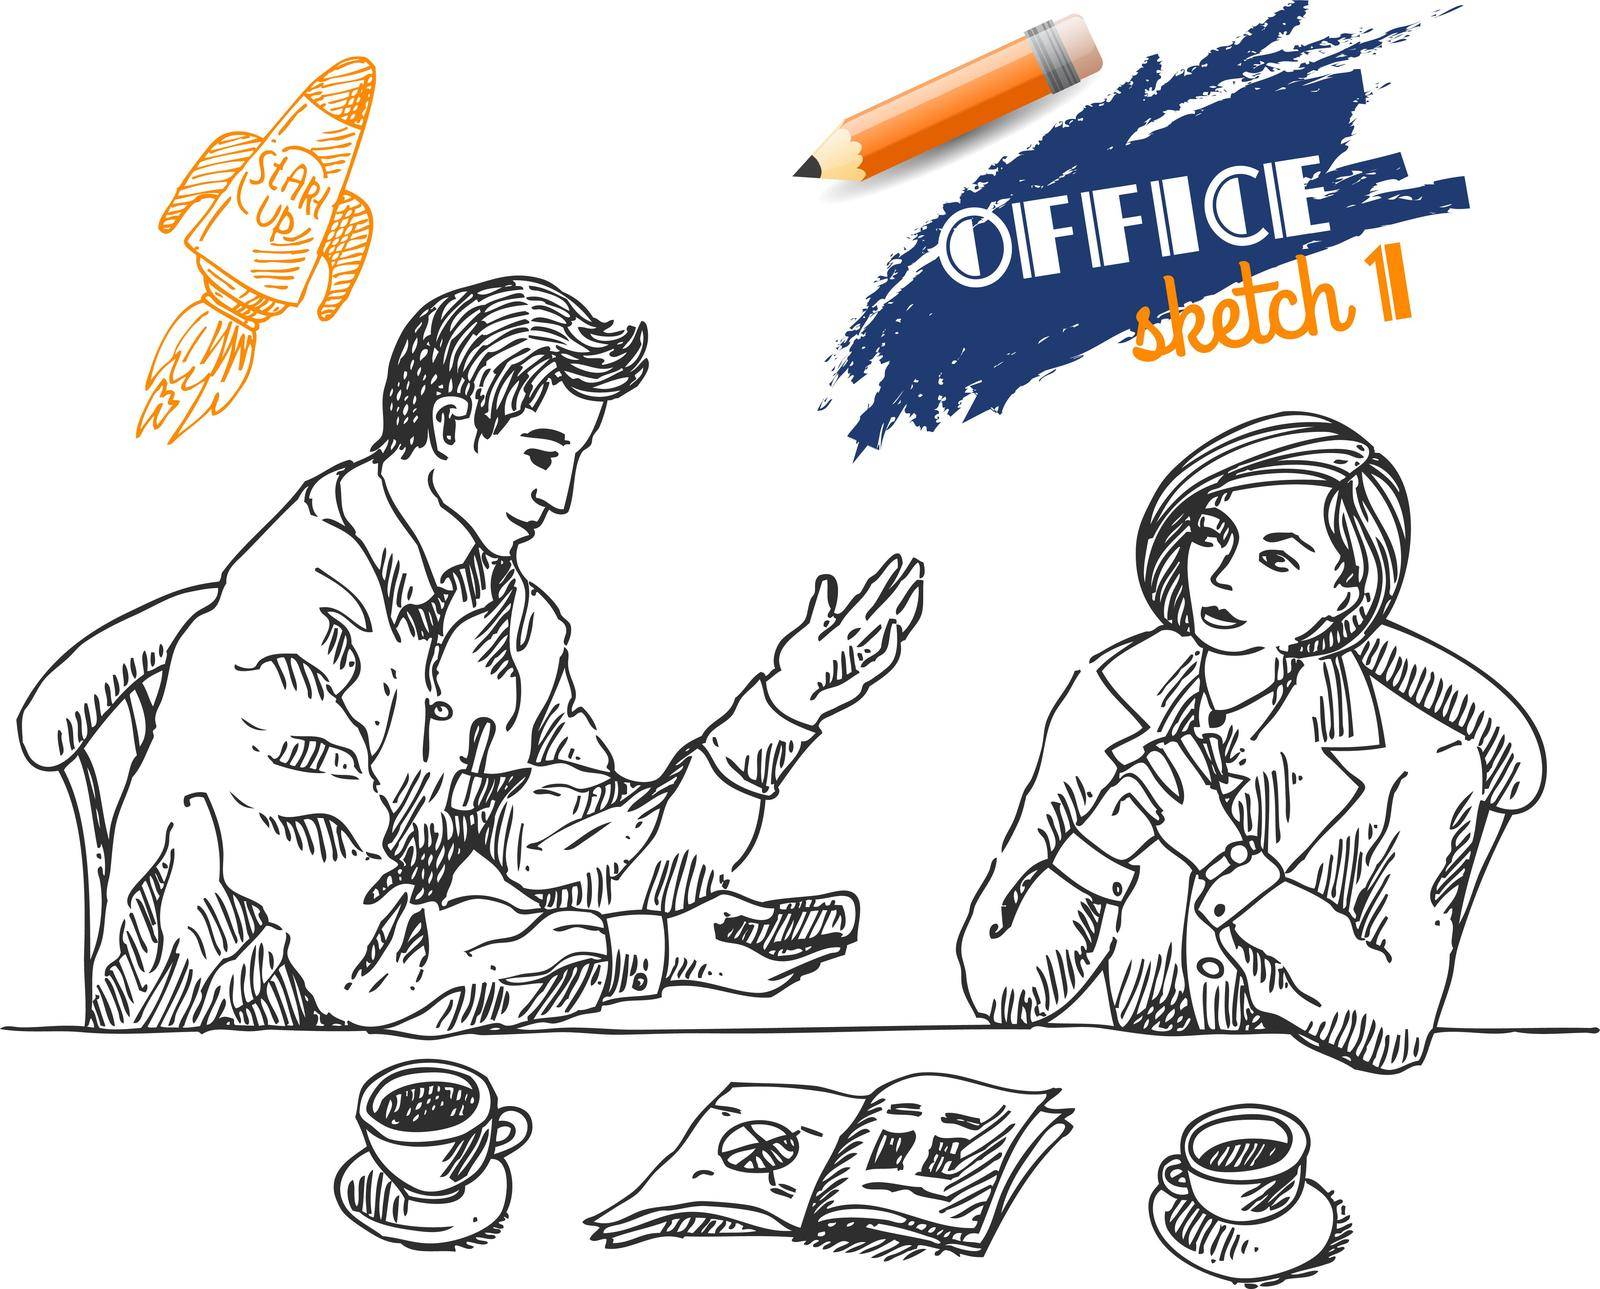 Man and woman in the business suit say about business. Sketch vector illustration.